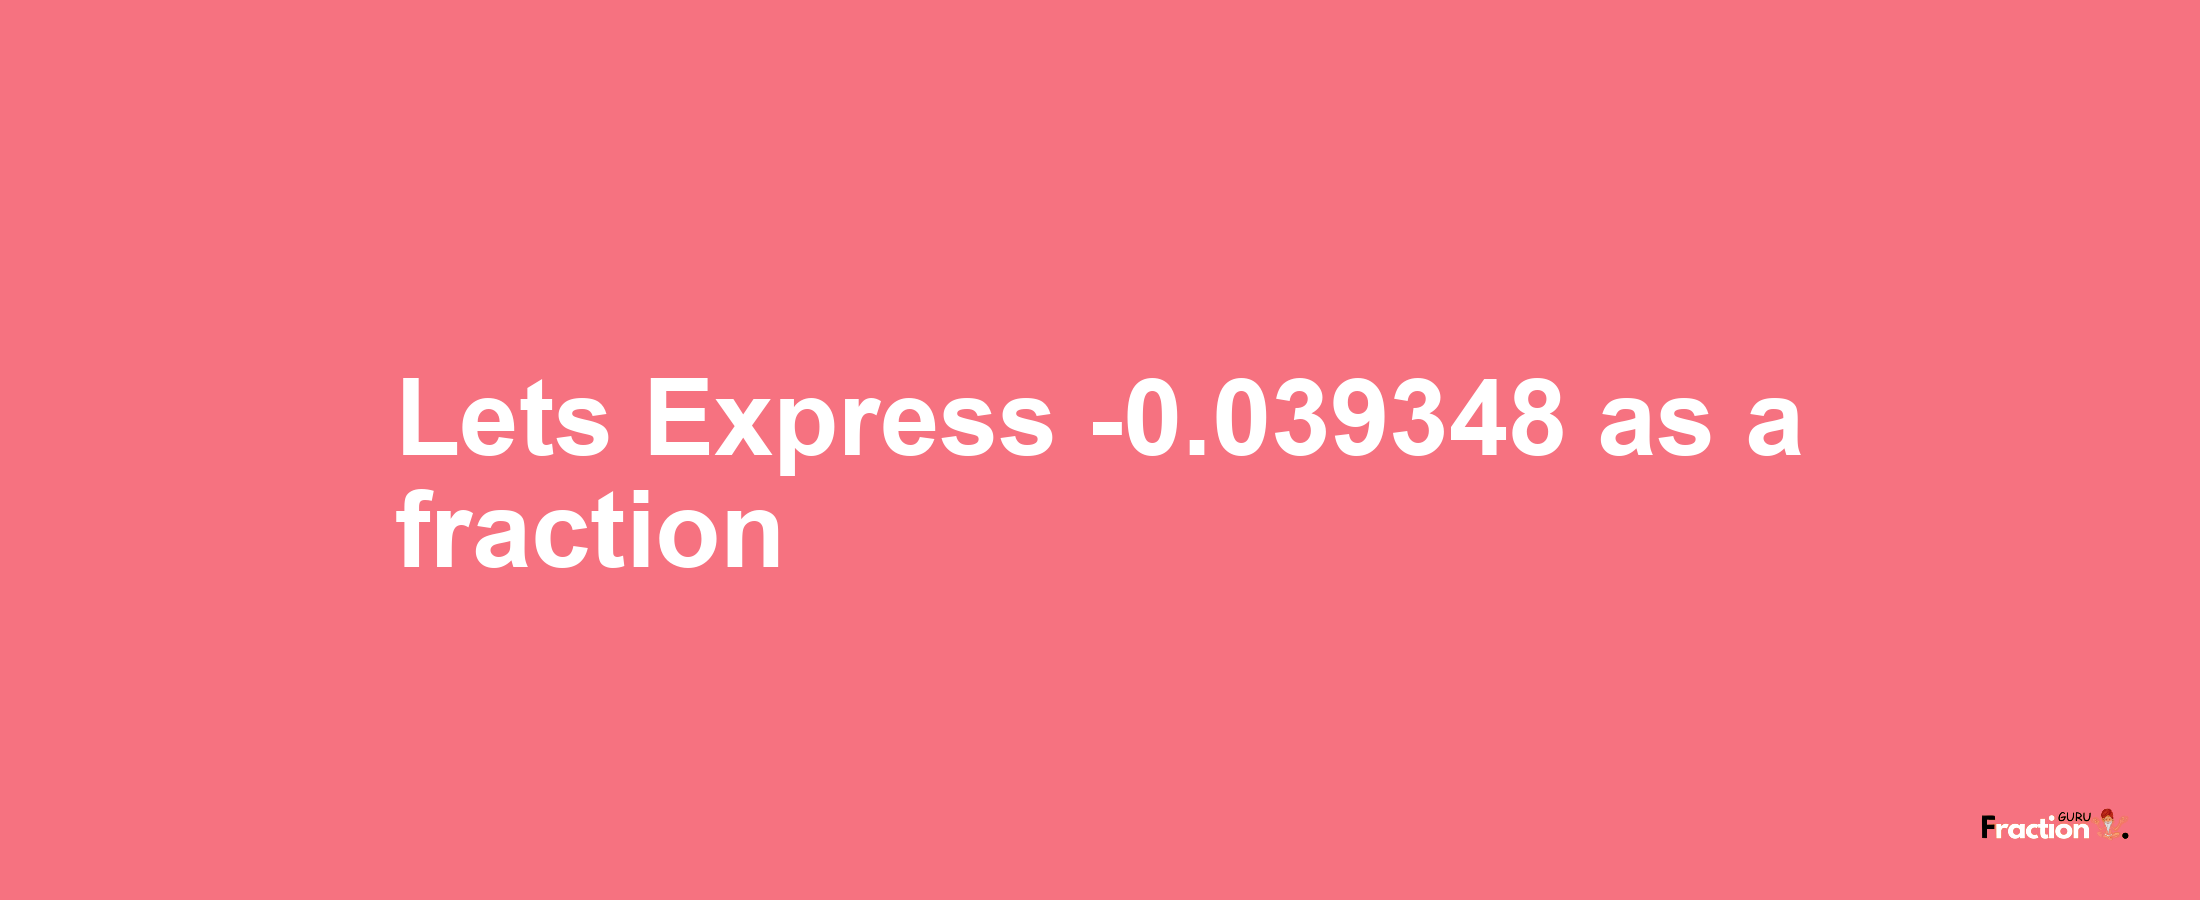 Lets Express -0.039348 as afraction